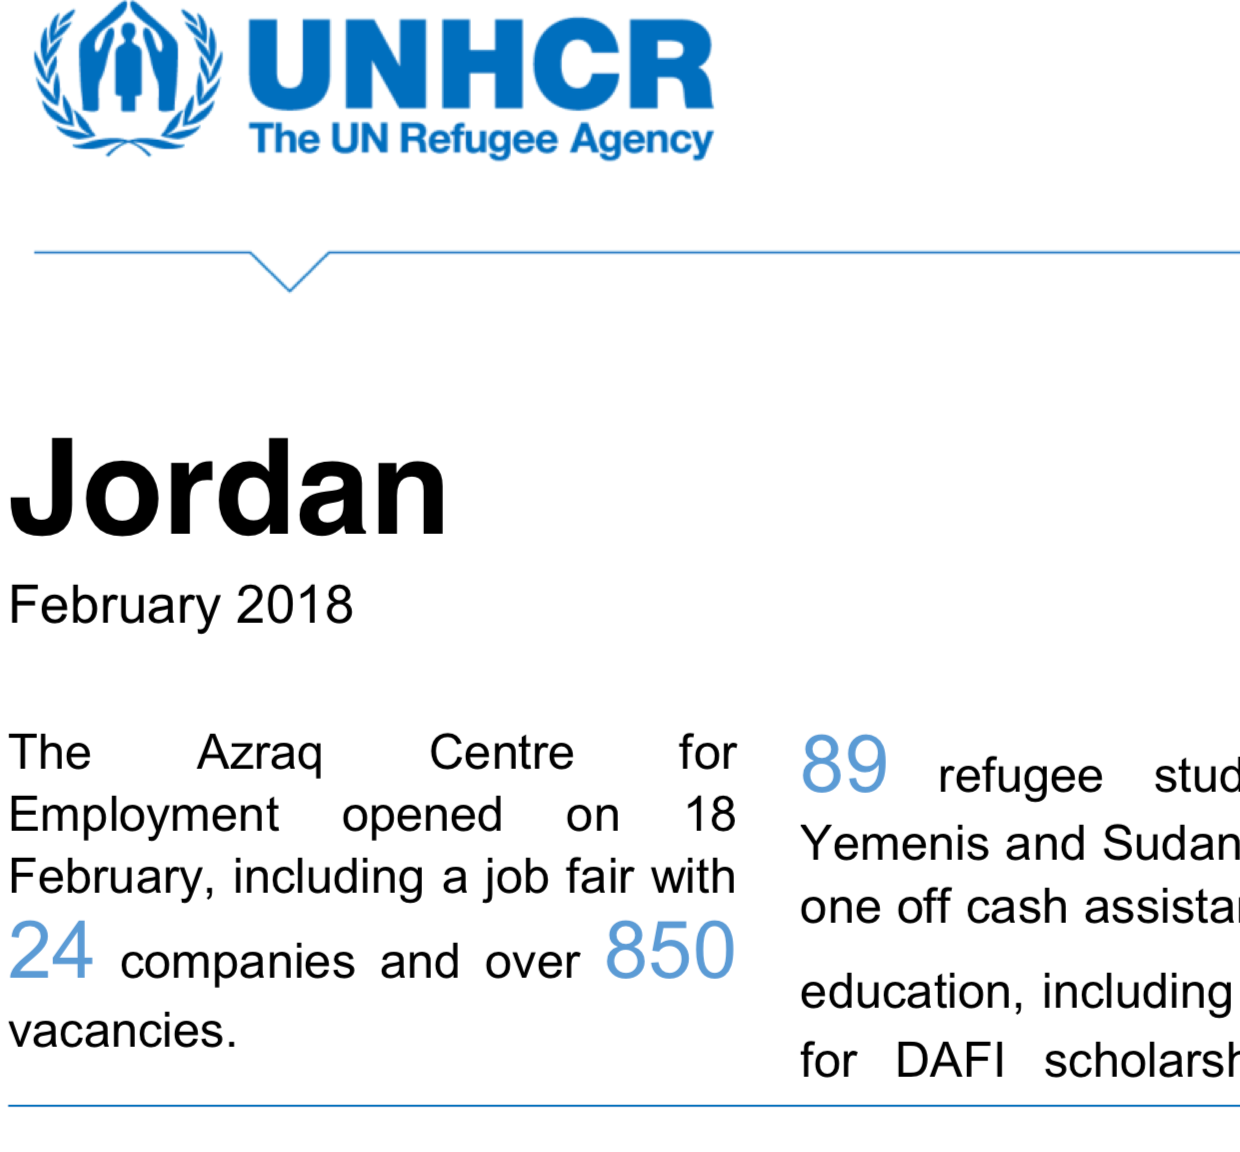 Proud of our collaboration with UNHCR in Jordan